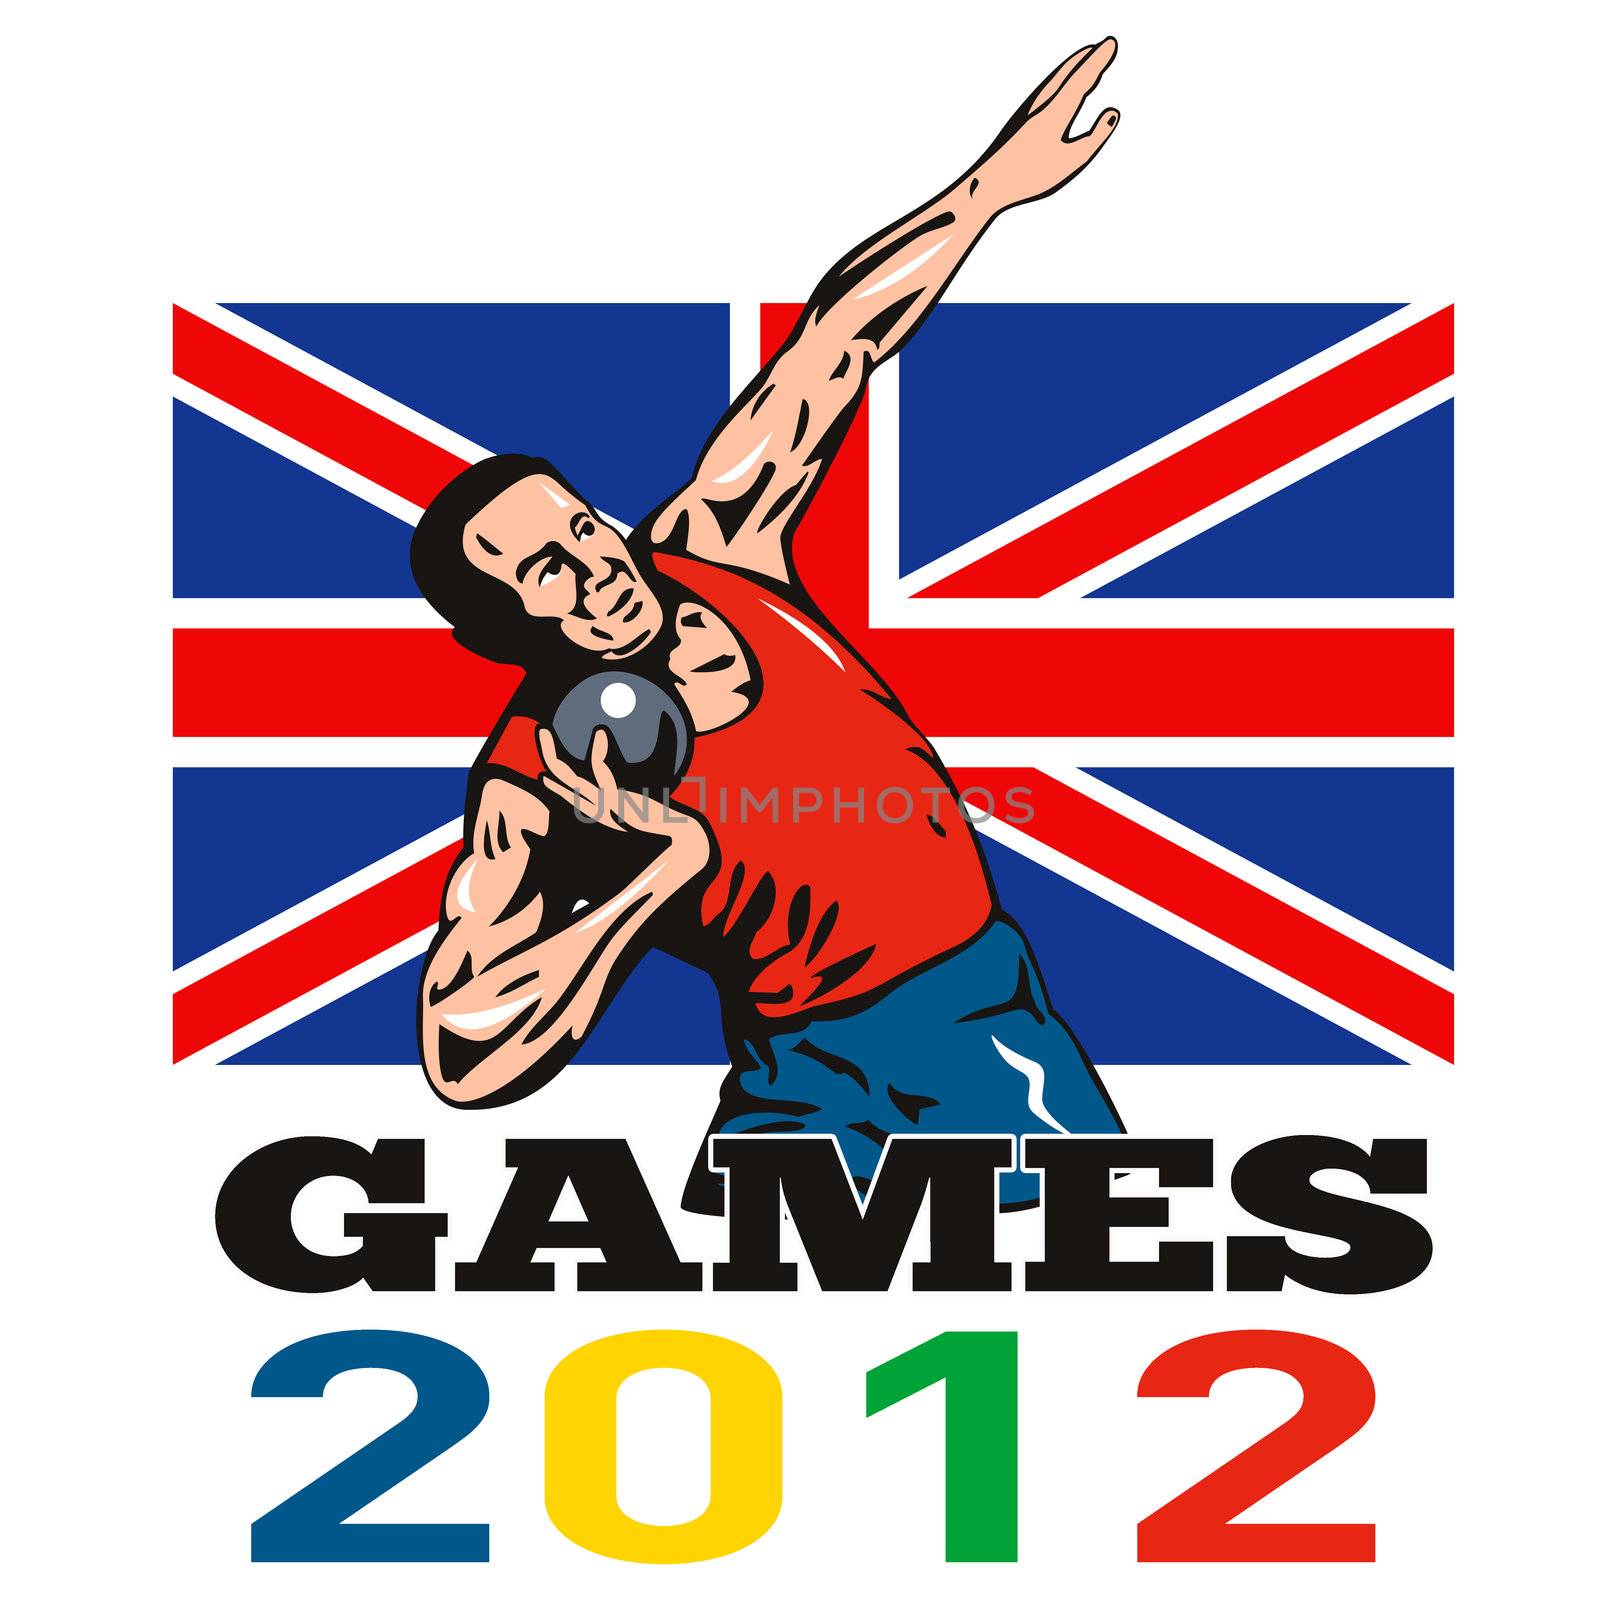 Illustration of an athlete shot put throw with words Summer Games 2012 and Union Jack British UK Flag done in retro style.
